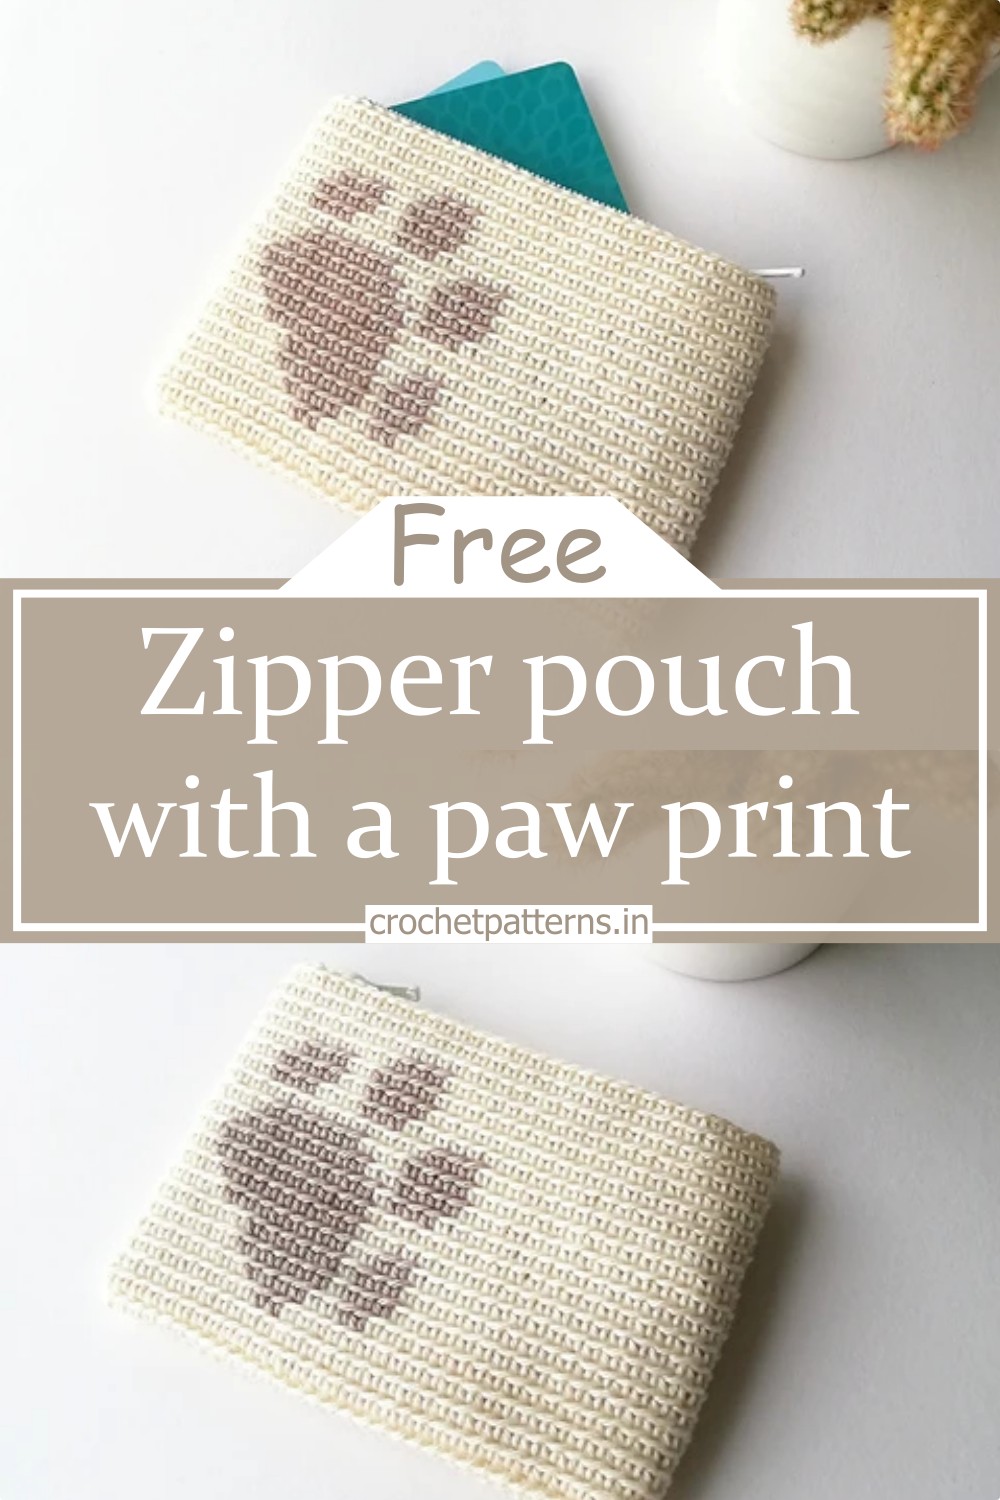 Zipper pouch with a paw print